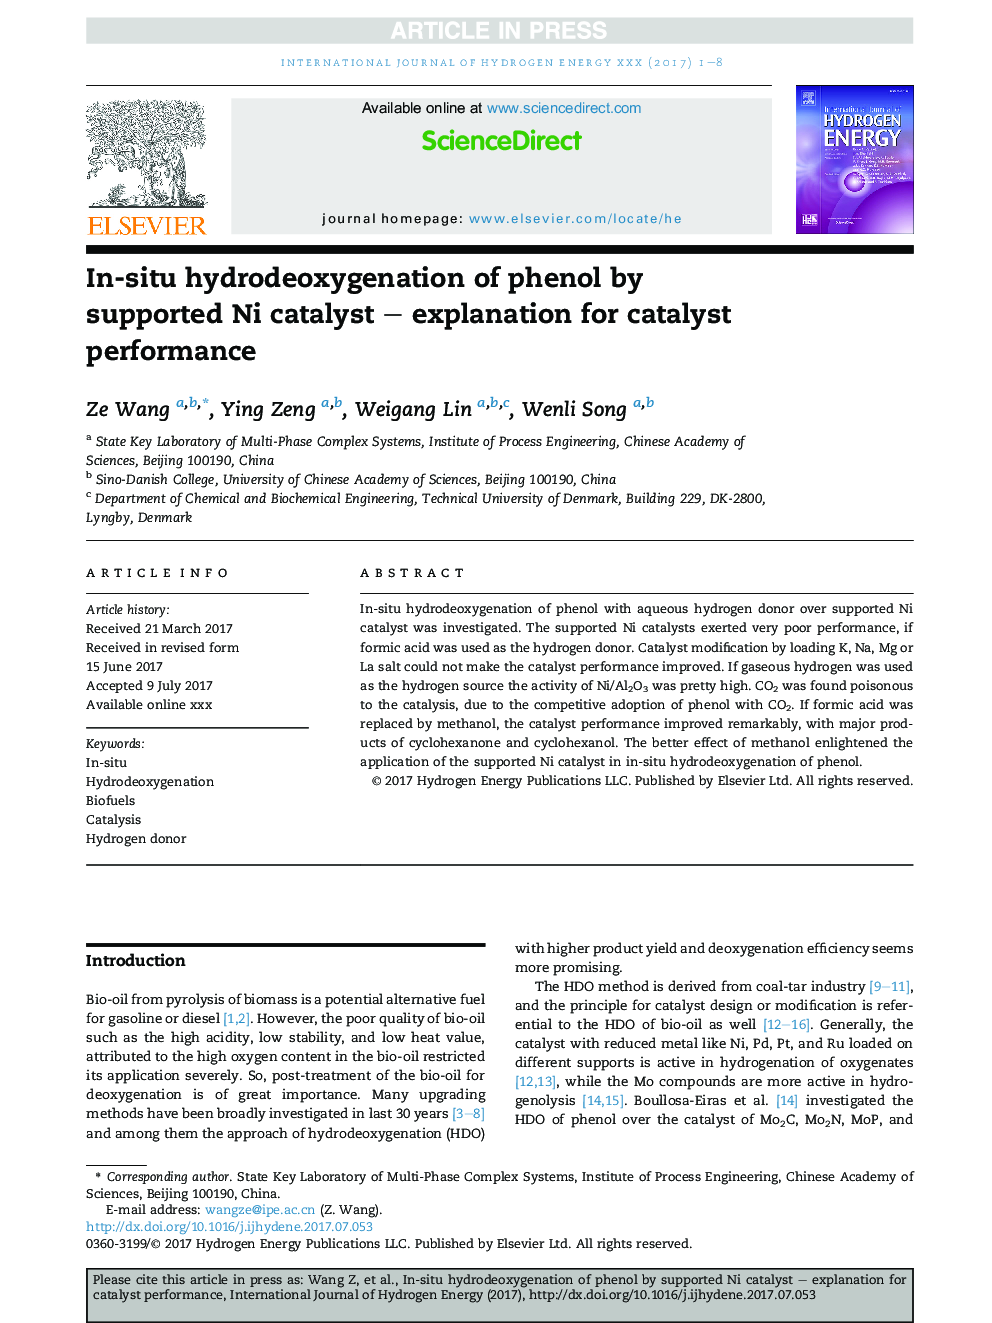 In-situ hydrodeoxygenation of phenol by supported Ni catalyst - explanation for catalyst performance